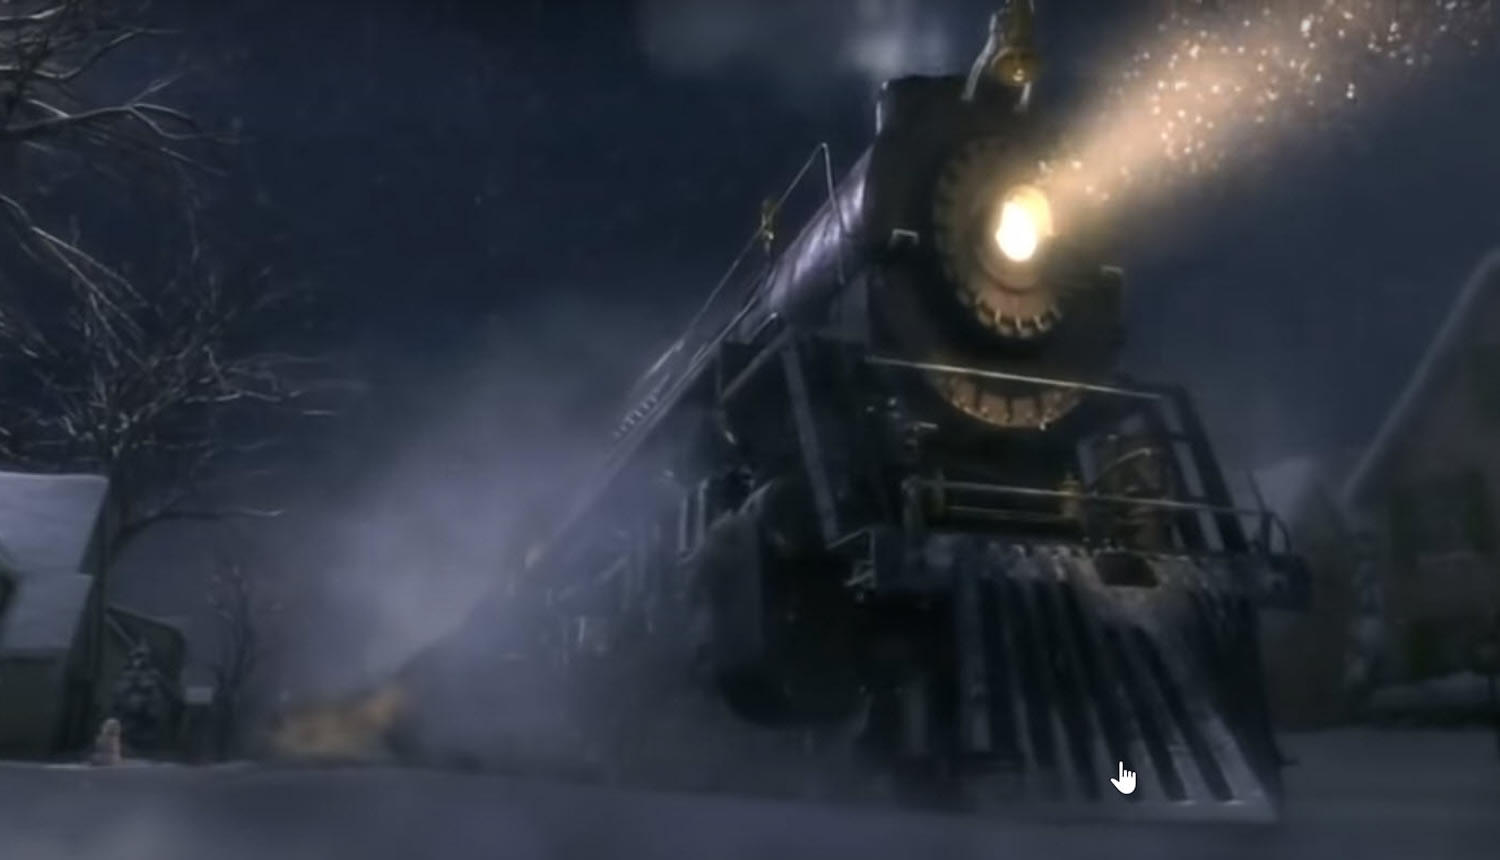 Where to watch 'The Polar Express': Streaming info, TV showtimes